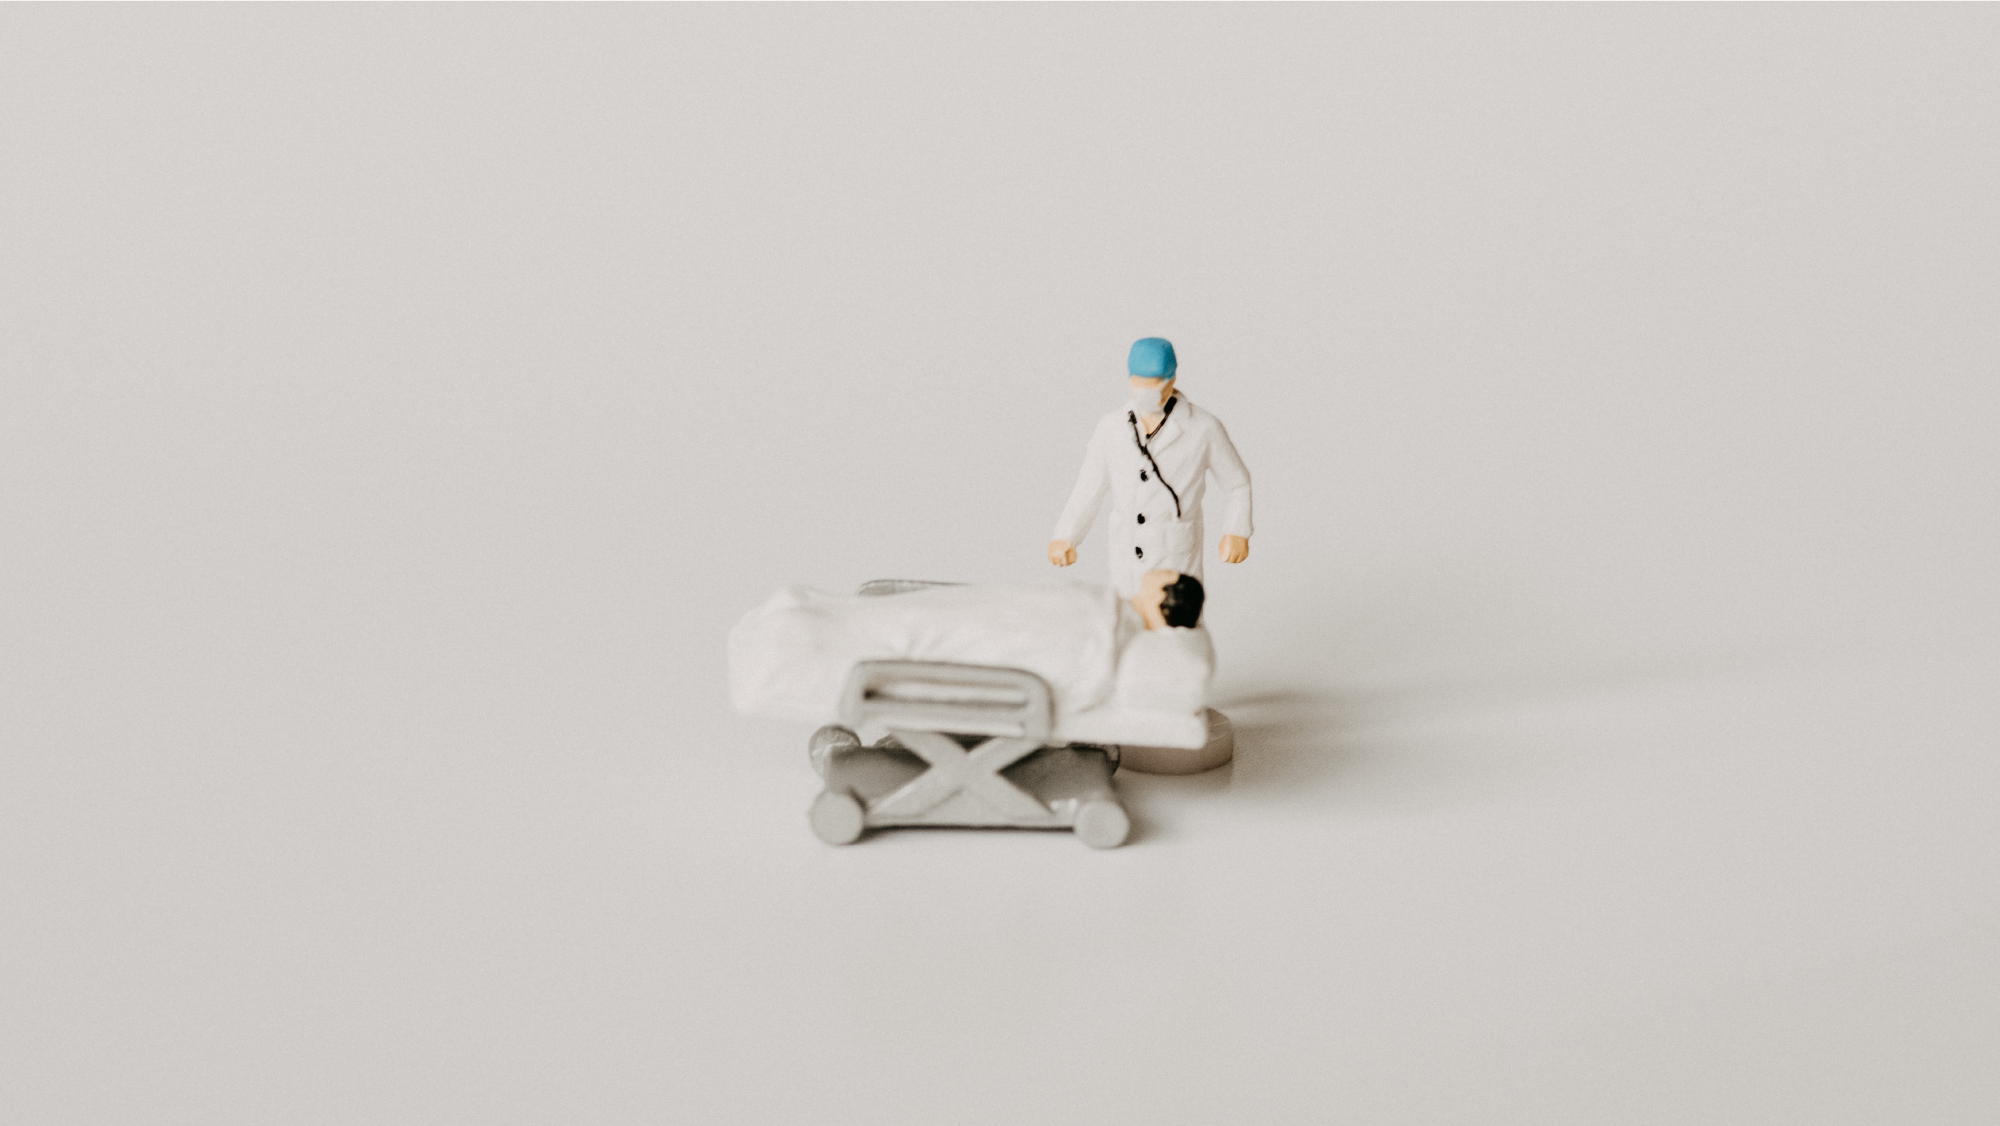 miniature figures of md and patient